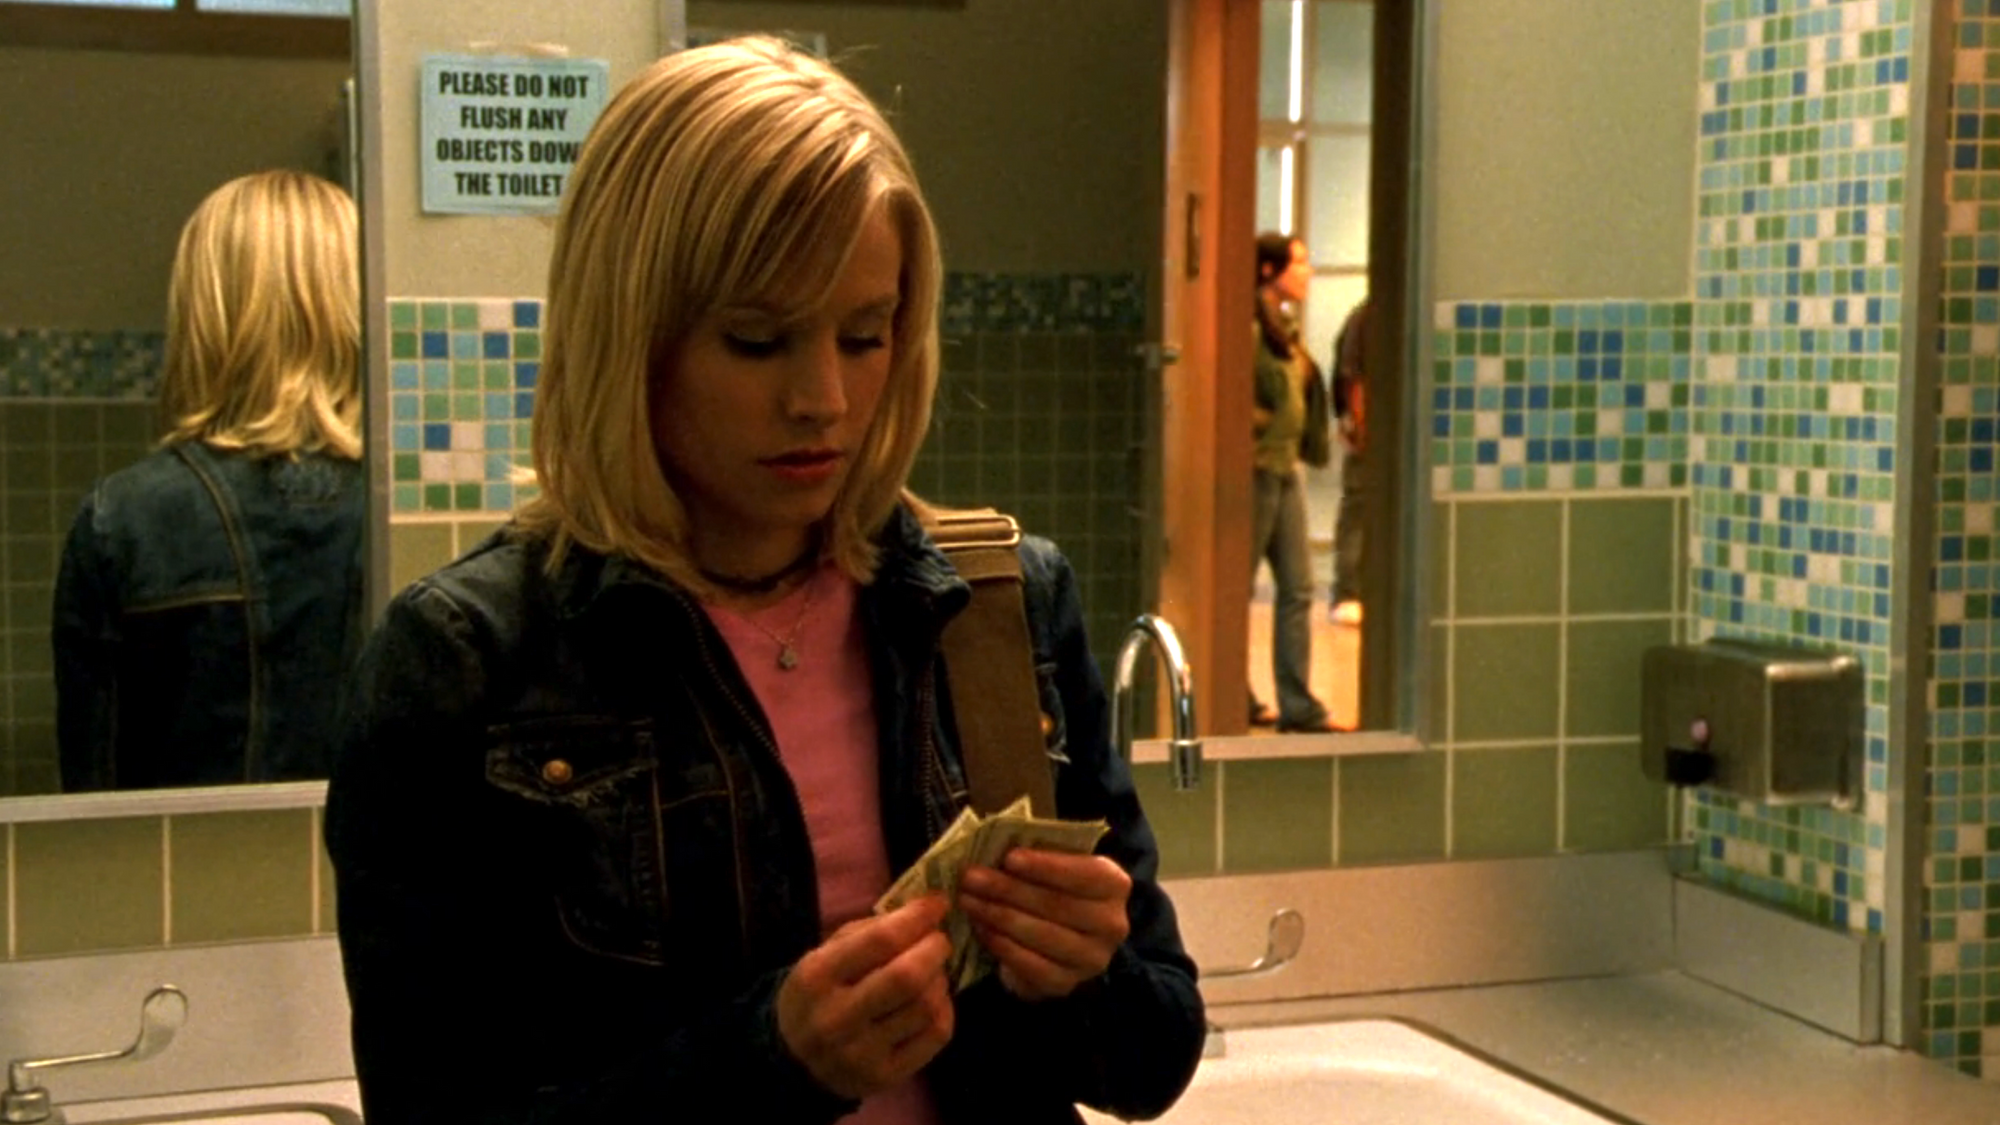 Screenshot from S1E17 of Veronica Mars. Veronica is in the bathroom at Neptune High looking down at cash in her hand and counting it